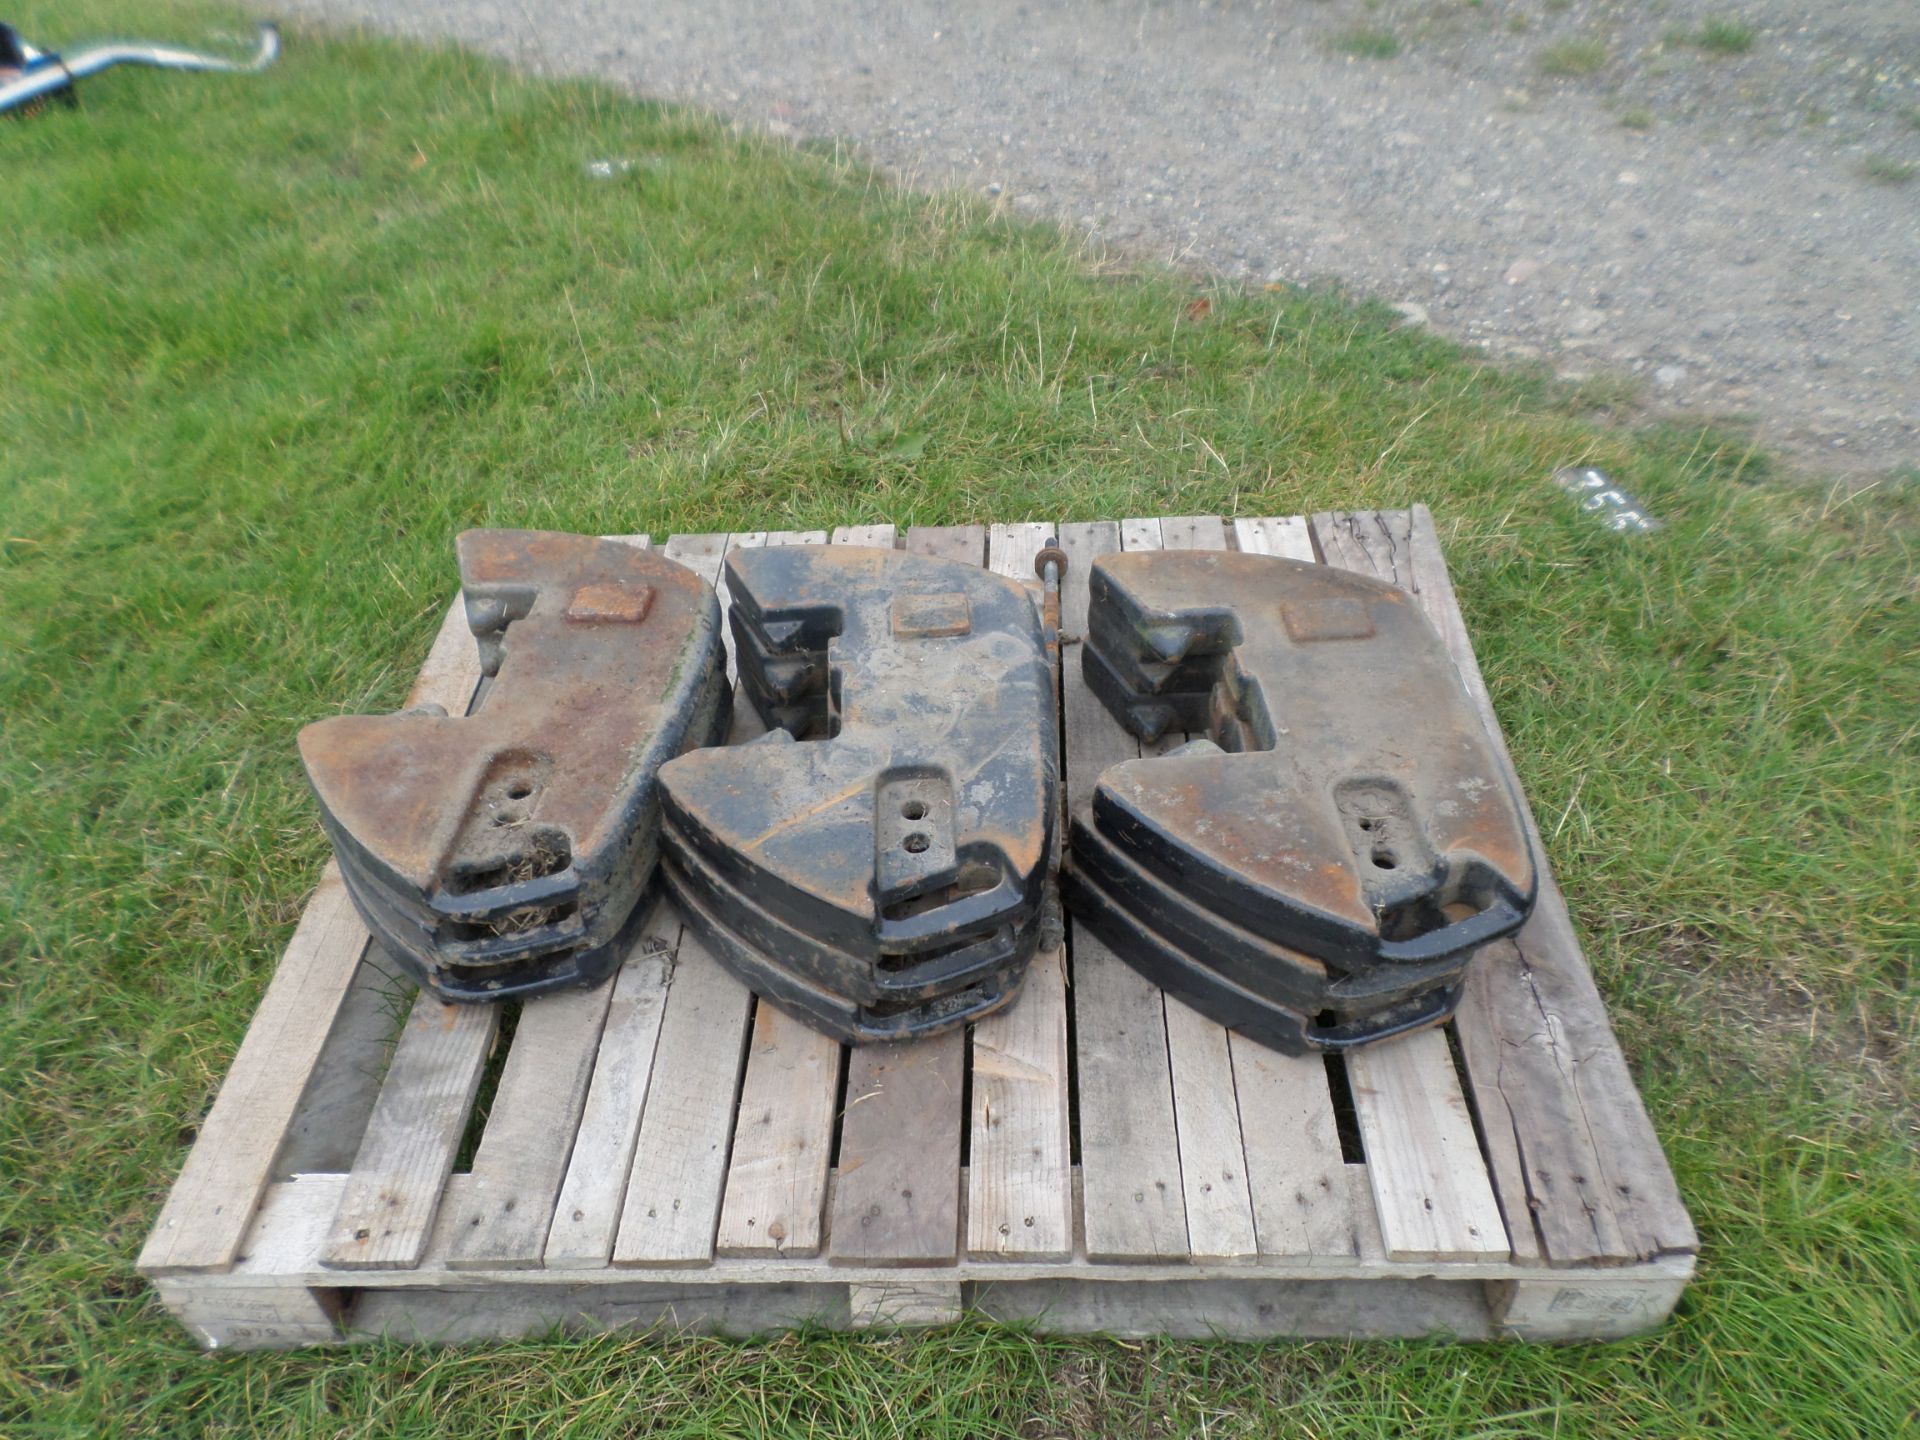 9 x Case MX tractor weights